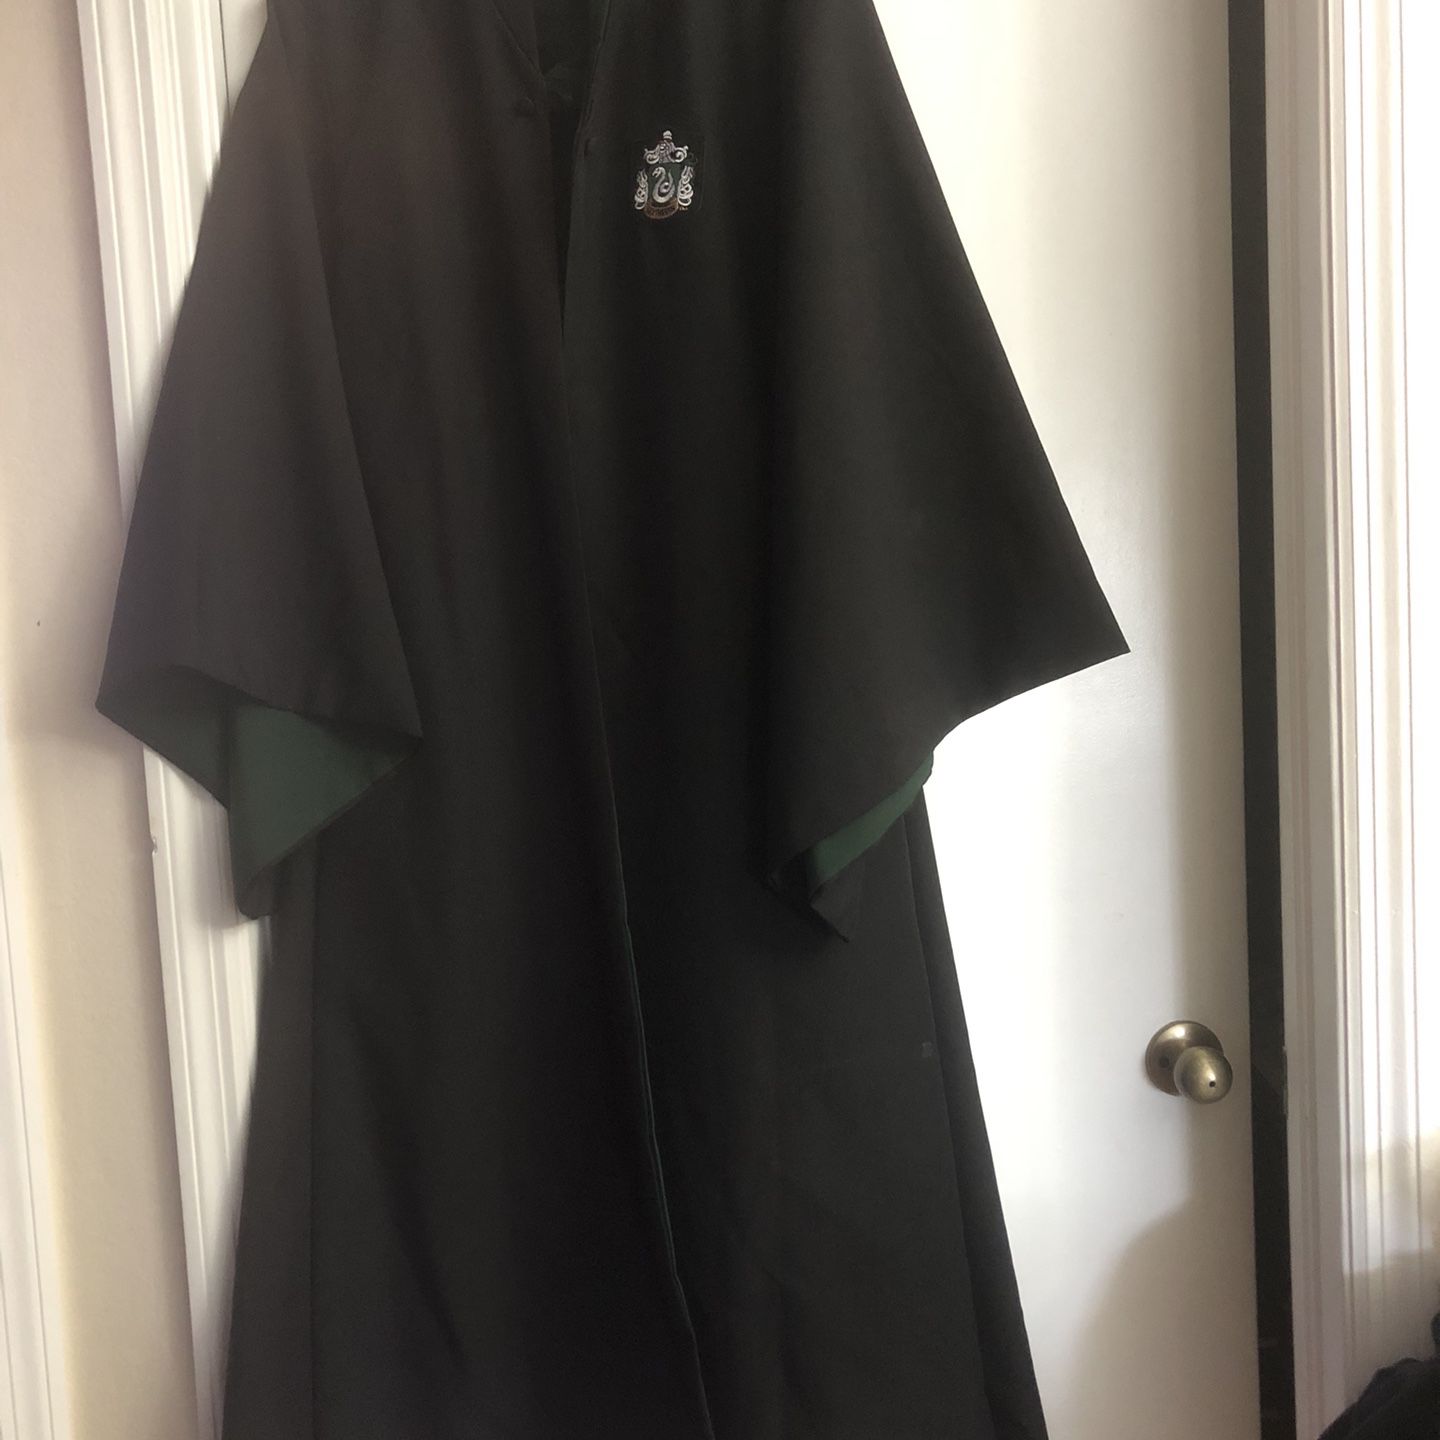 Slytherin Robes, Medium,  From Universal Parks 